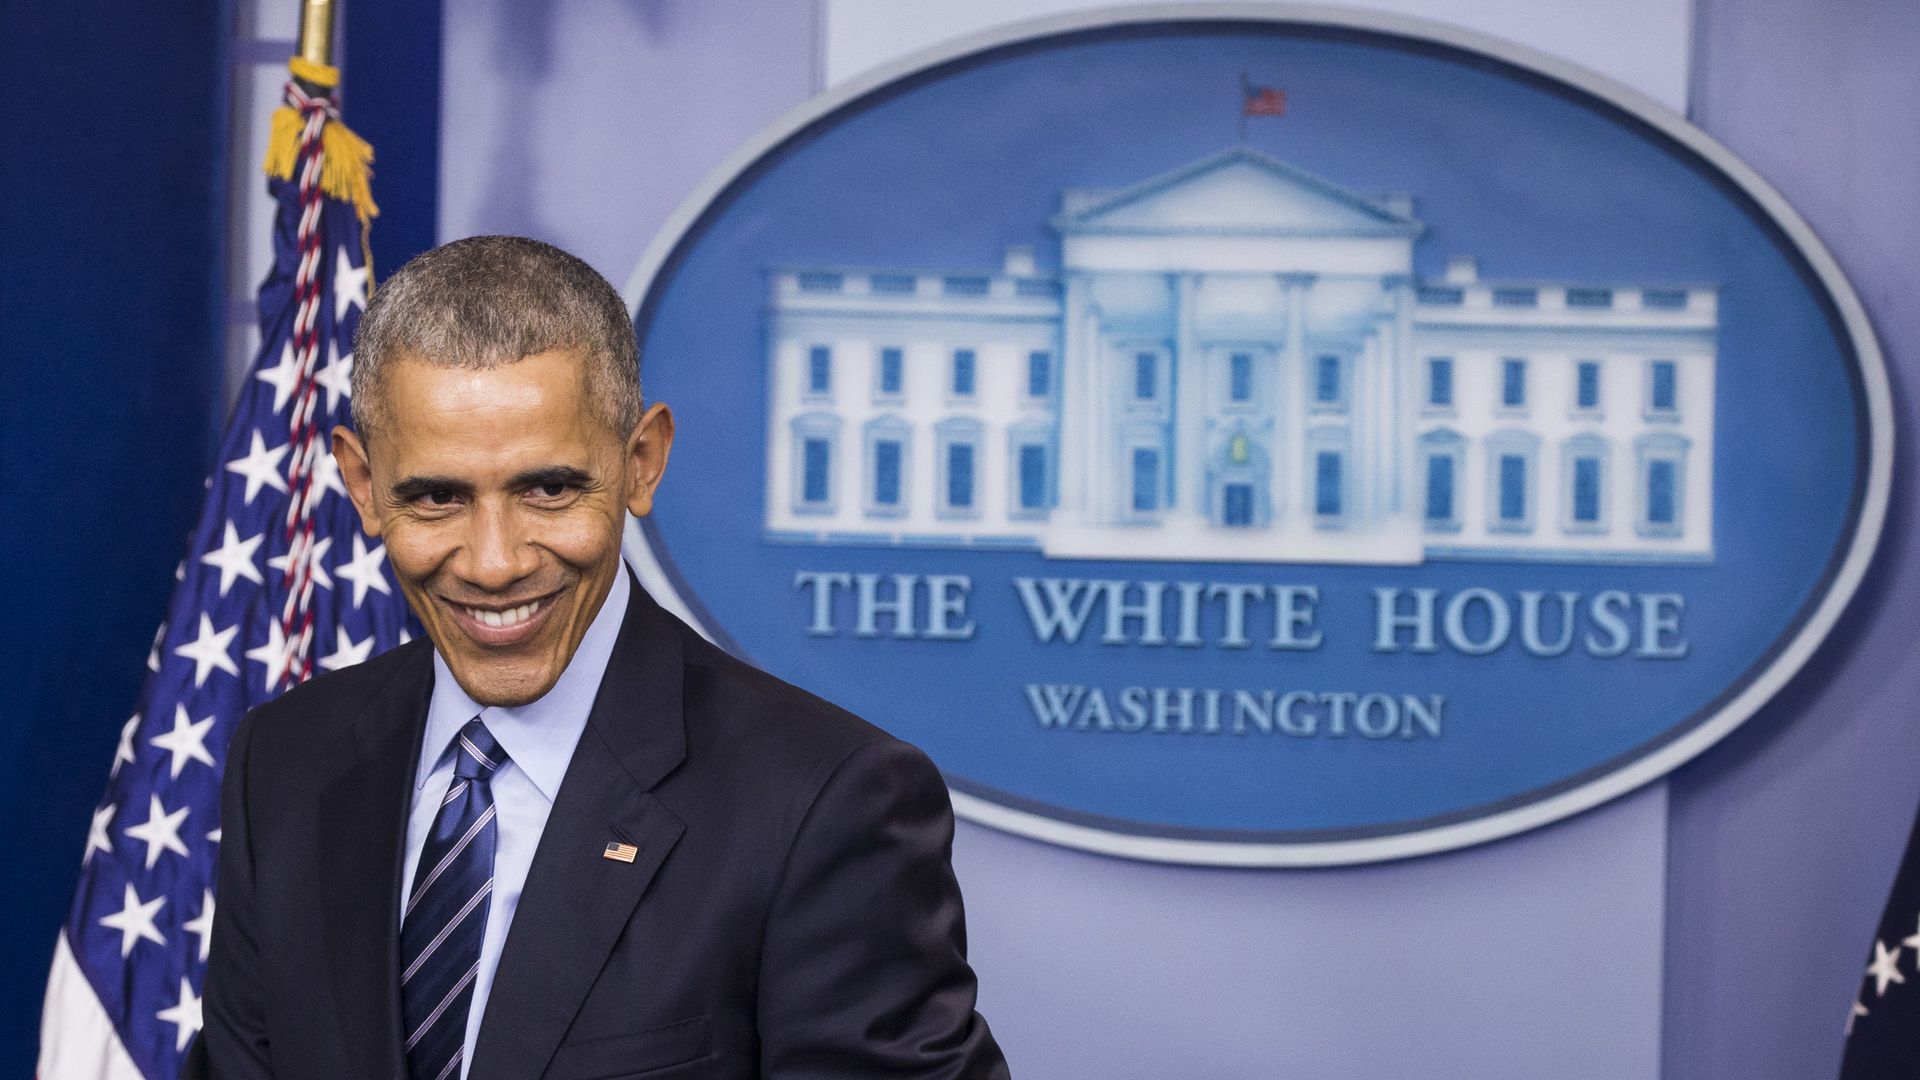 Then-President Obama, smiling, in the White House briefing room.